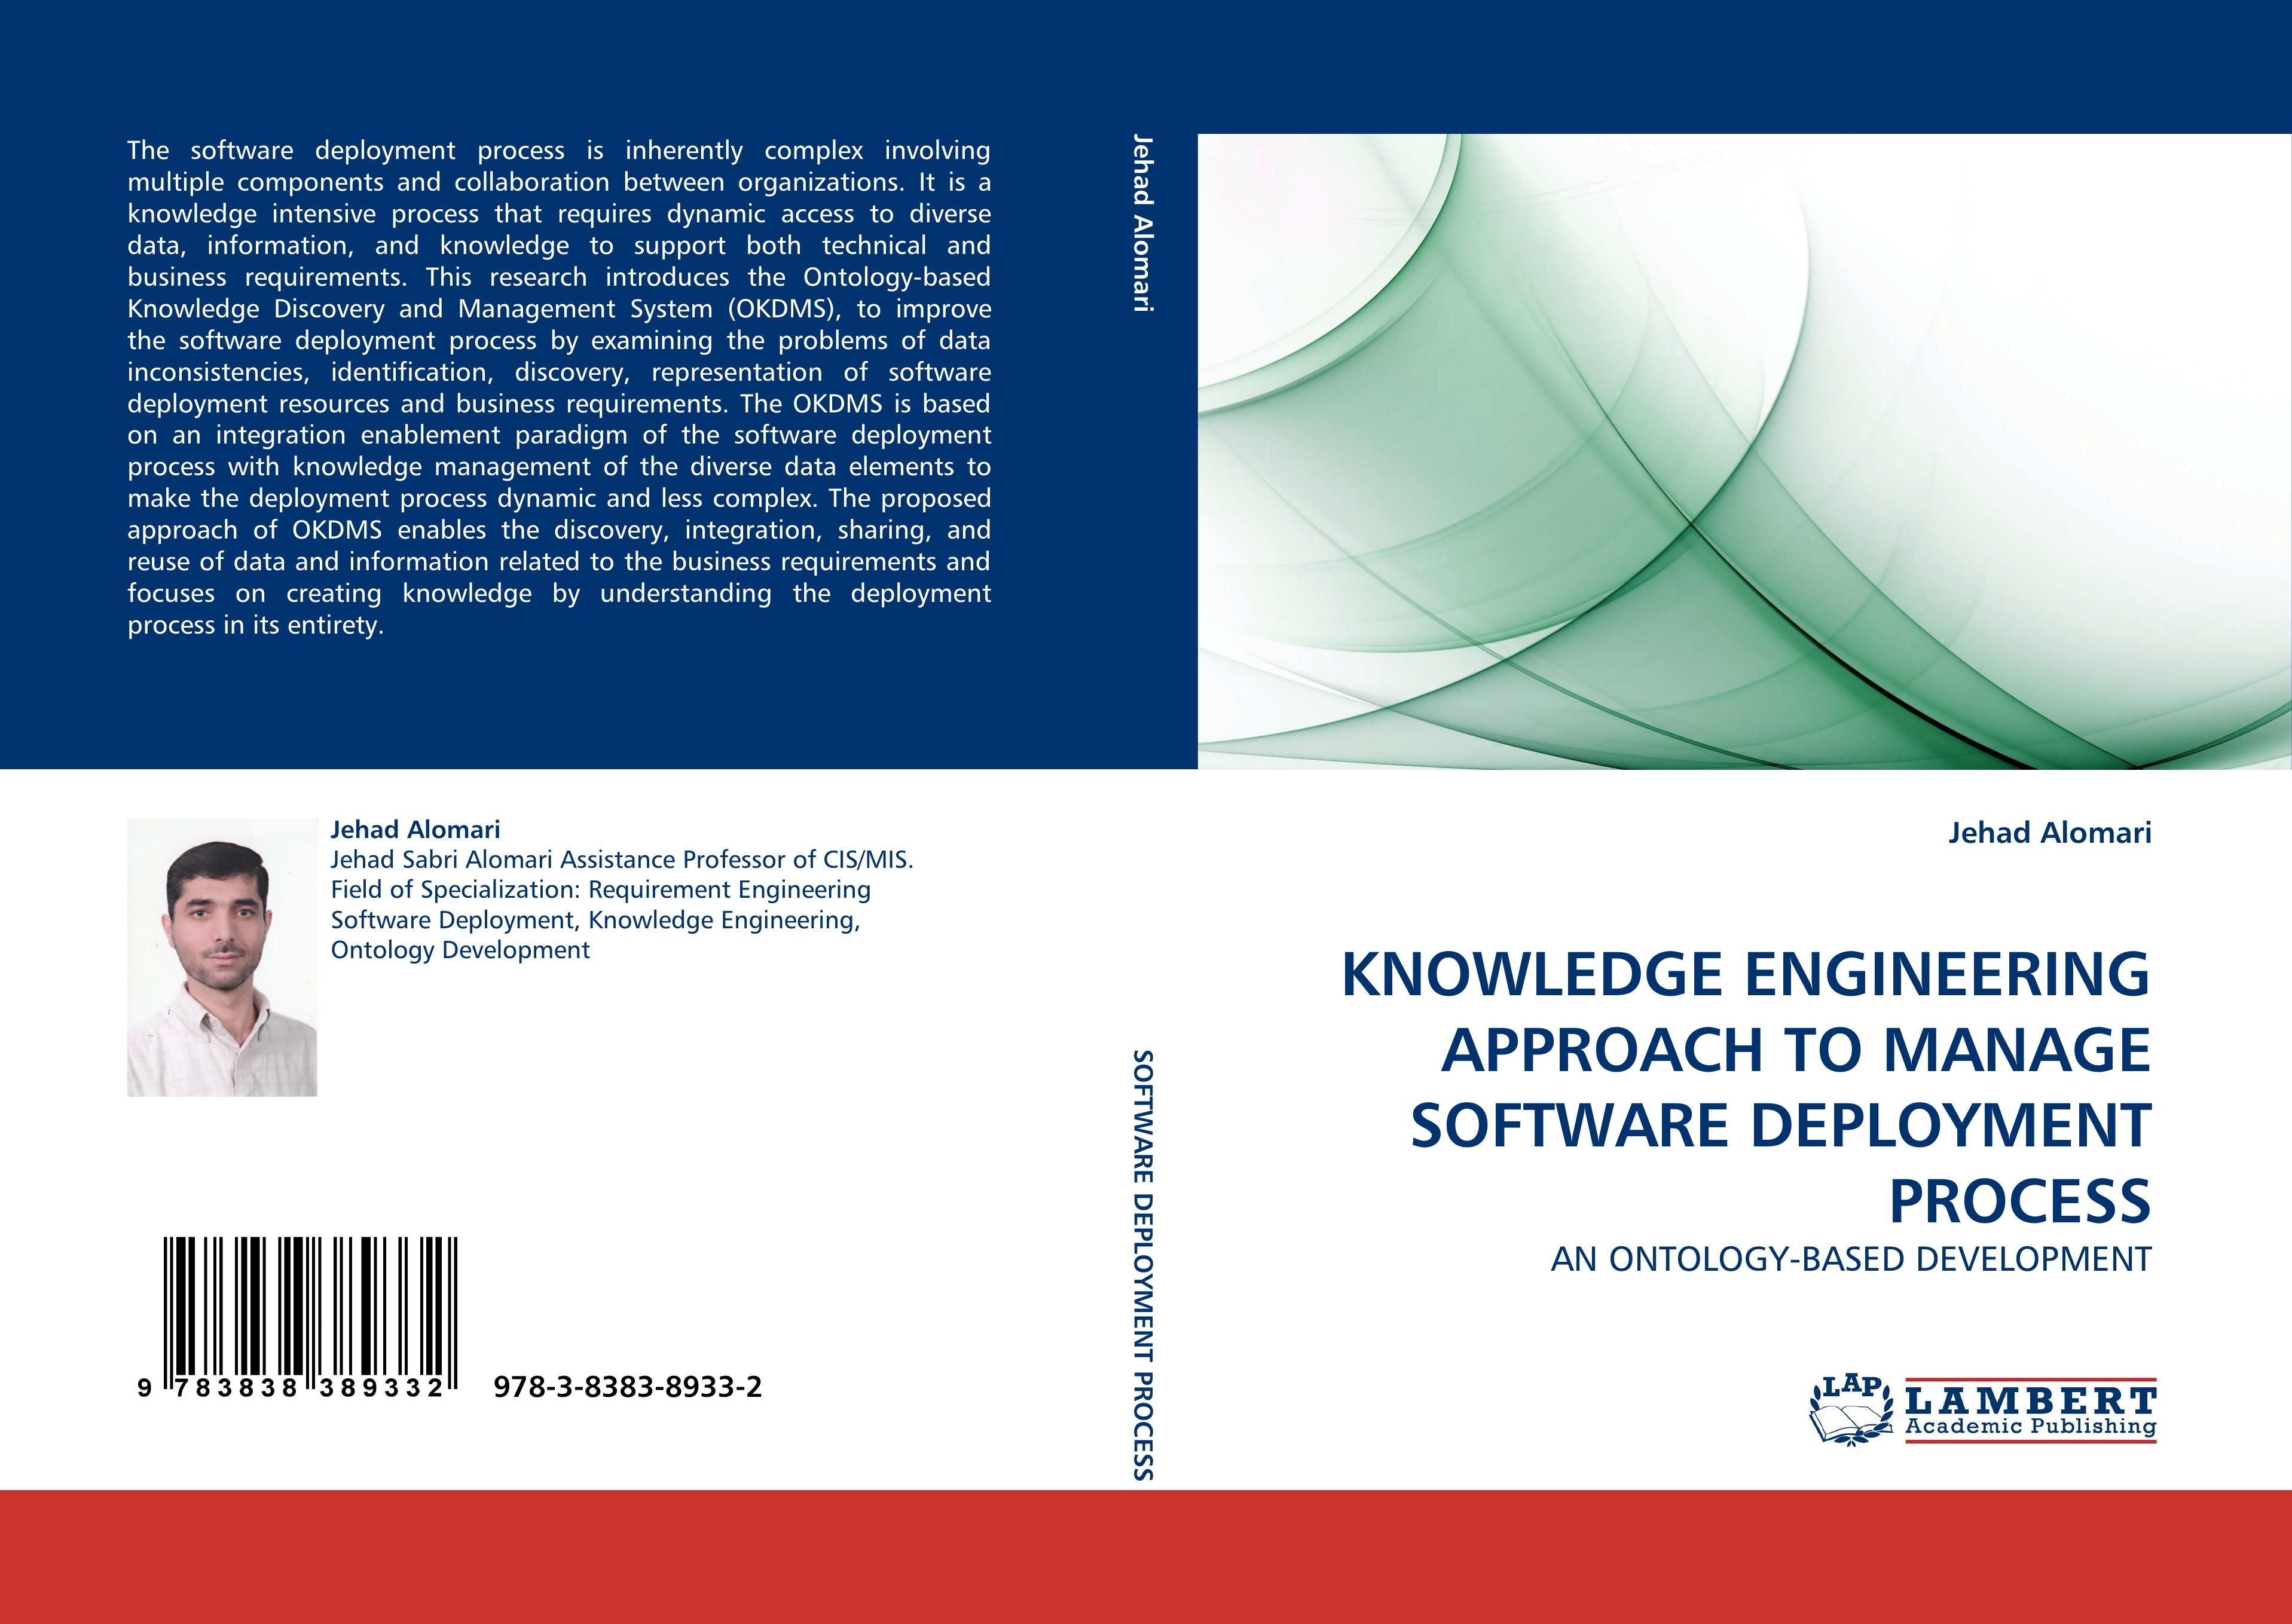 KNOWLEDGE ENGINEERING APPROACH TO MANAGE SOFTWARE DEPLOYMENT PROCESS - Alomari, Jehad